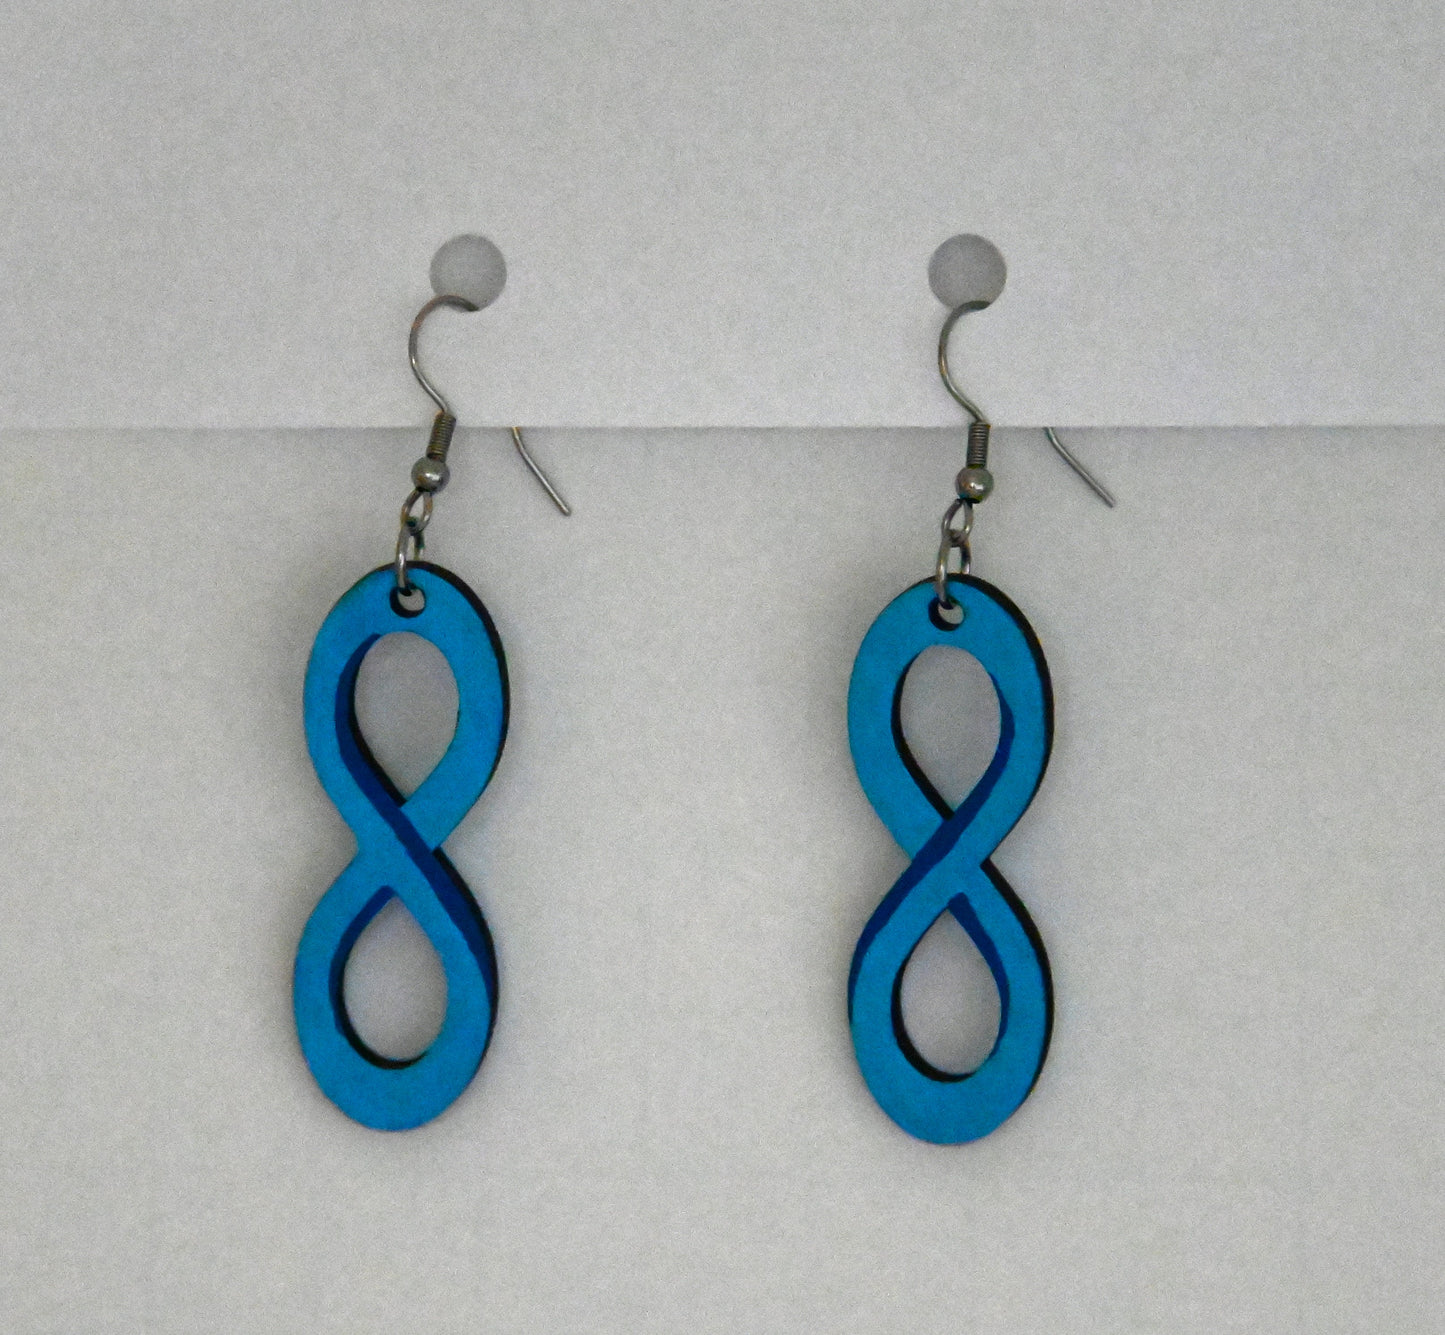 Compassion Earrings (2 pairs)